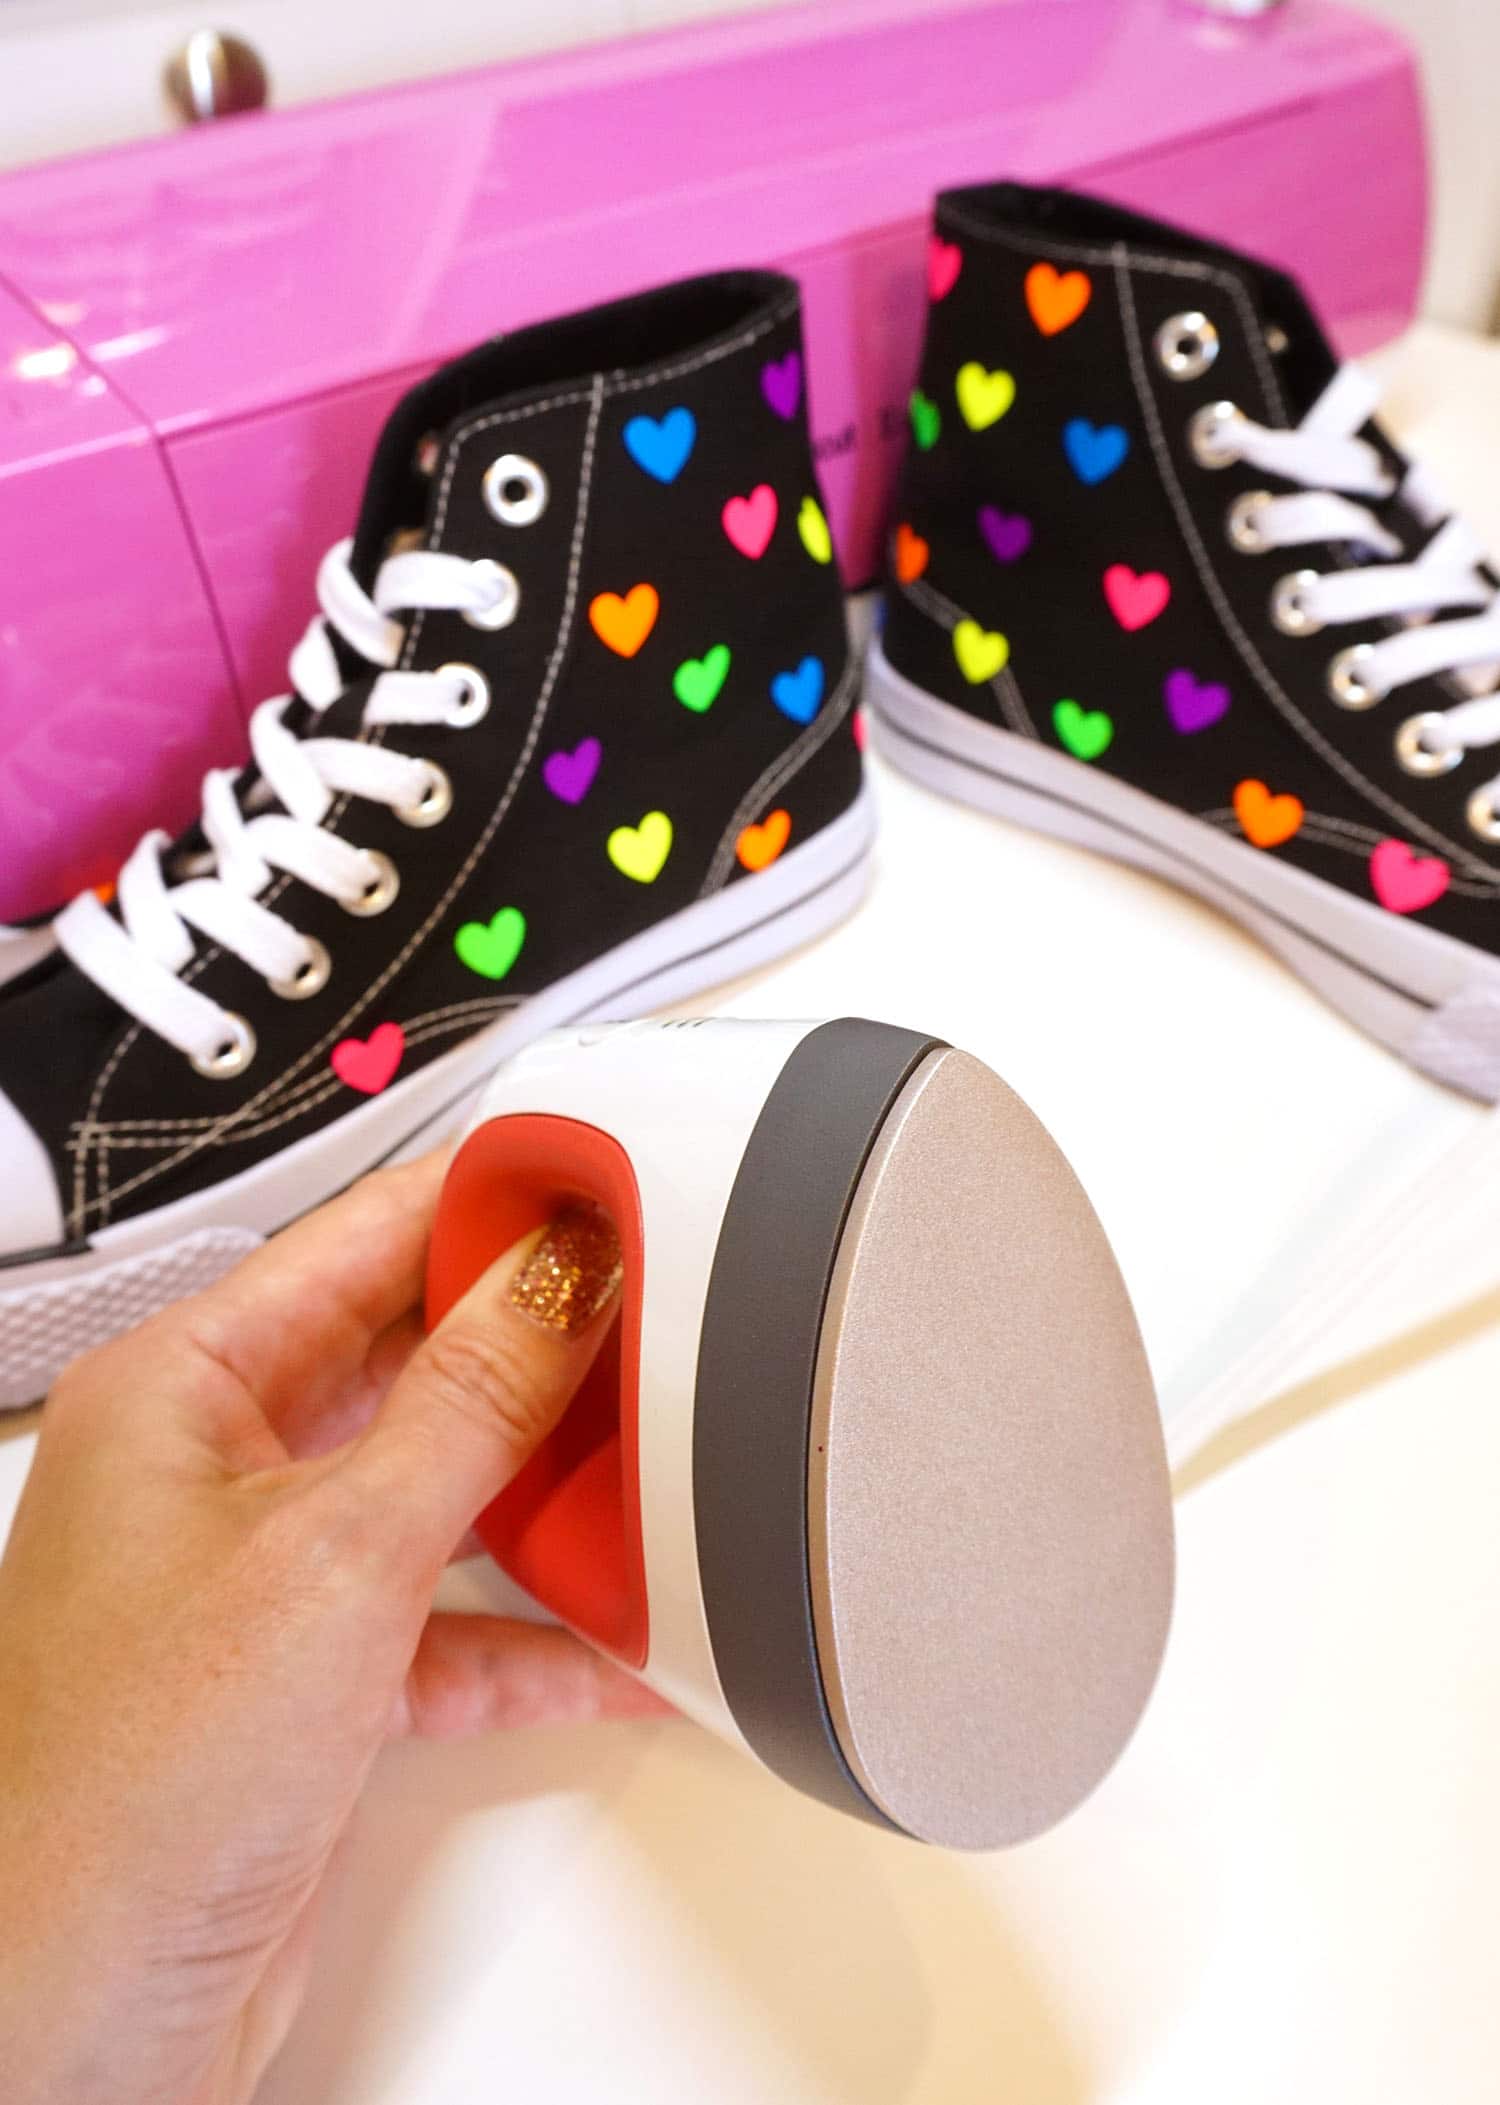 Ginger Snap Crafts: DIY Polka Dot Shoes with the Cricut Easypress Mini